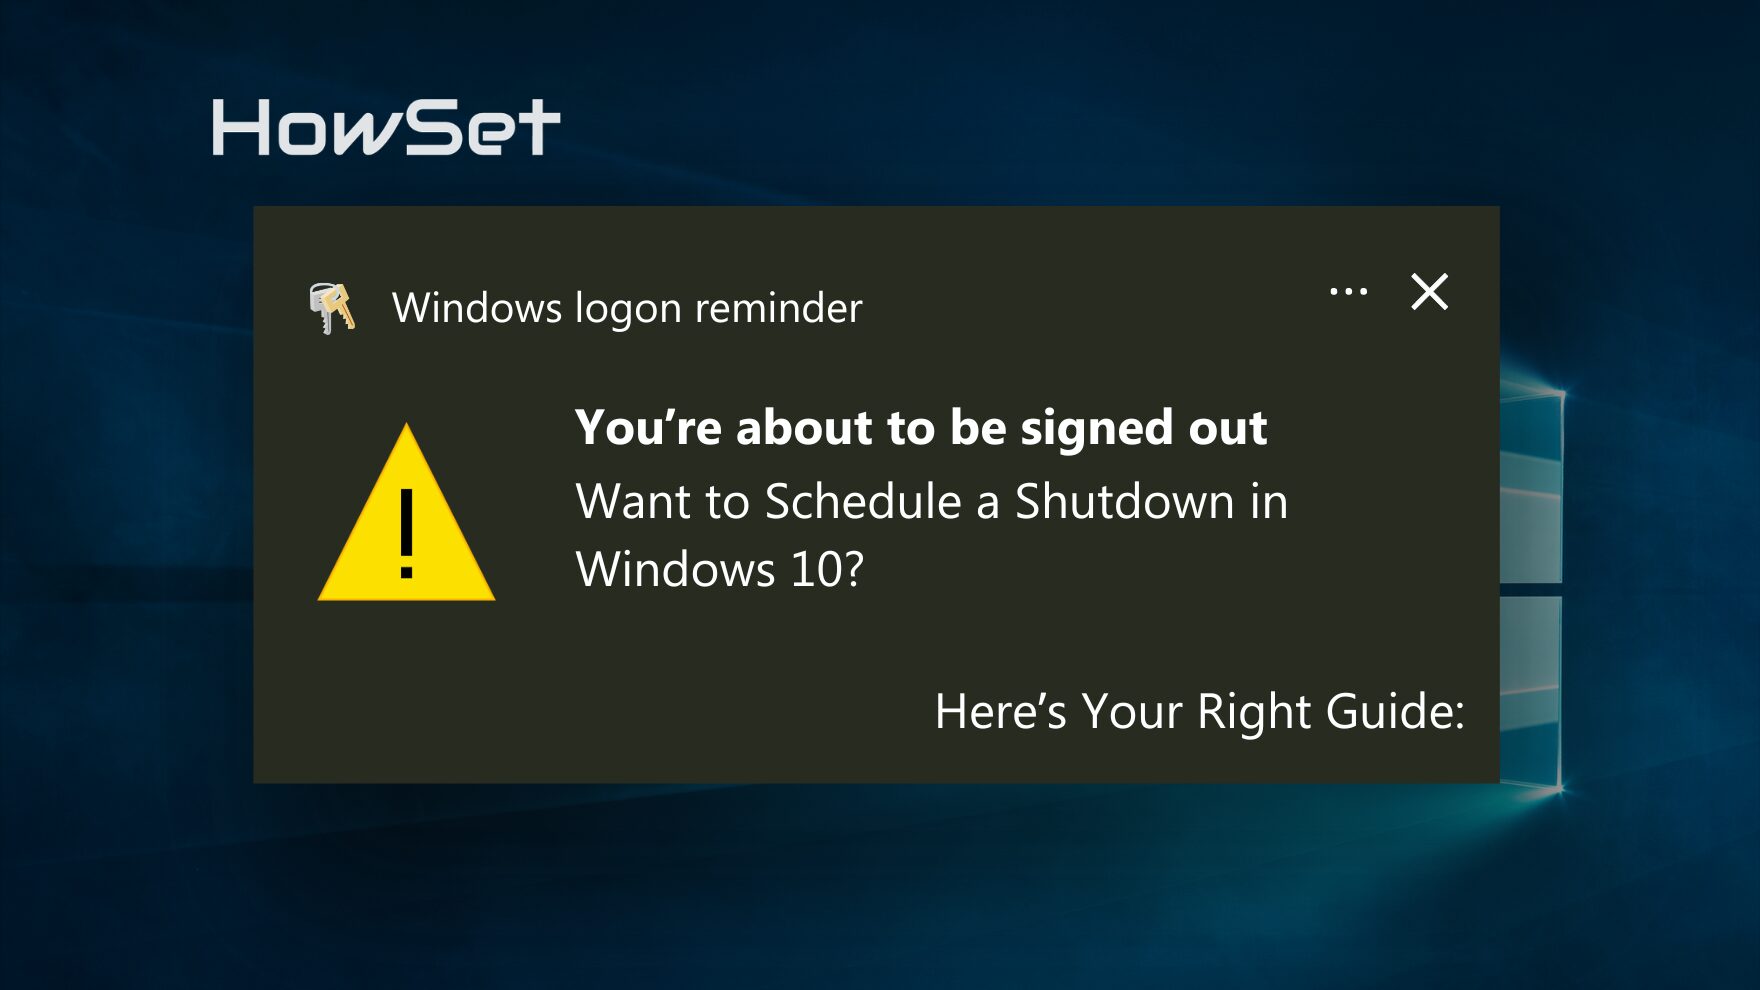 _Want to Schedule a Shutdown in Windows 10 Here’s Your Right Guide